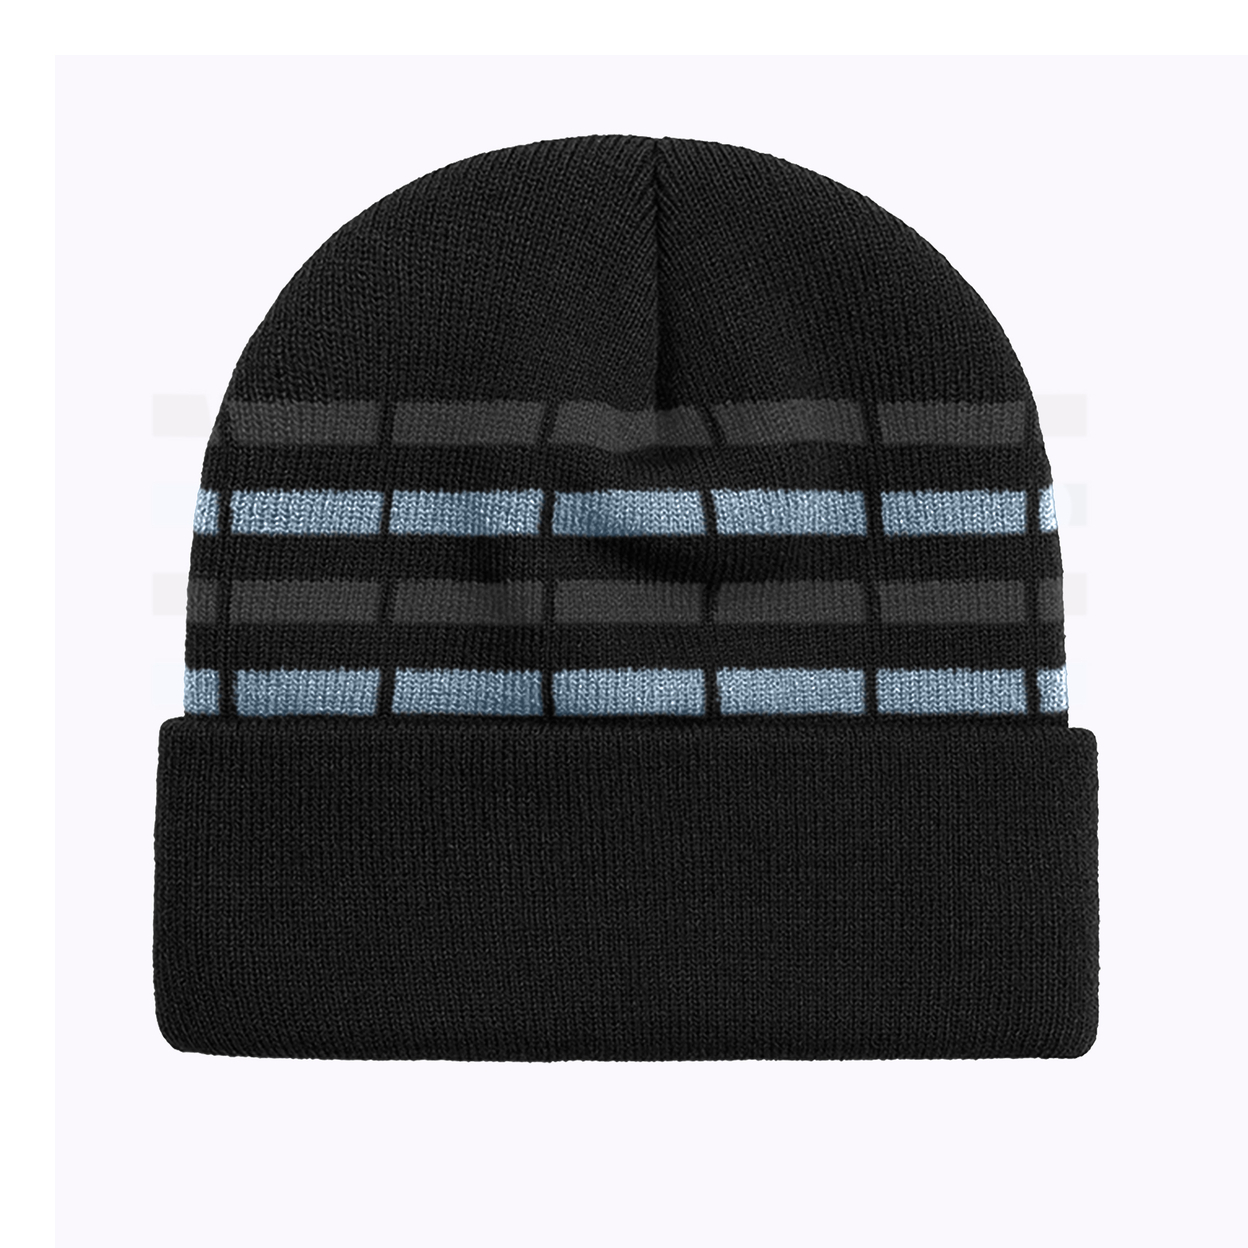 2-Pack Men's Winter Warm Cozy Knit Cuffed Solid & Striped Beanie Hat With Faux Fur Lining - Black Solid / Black Striped